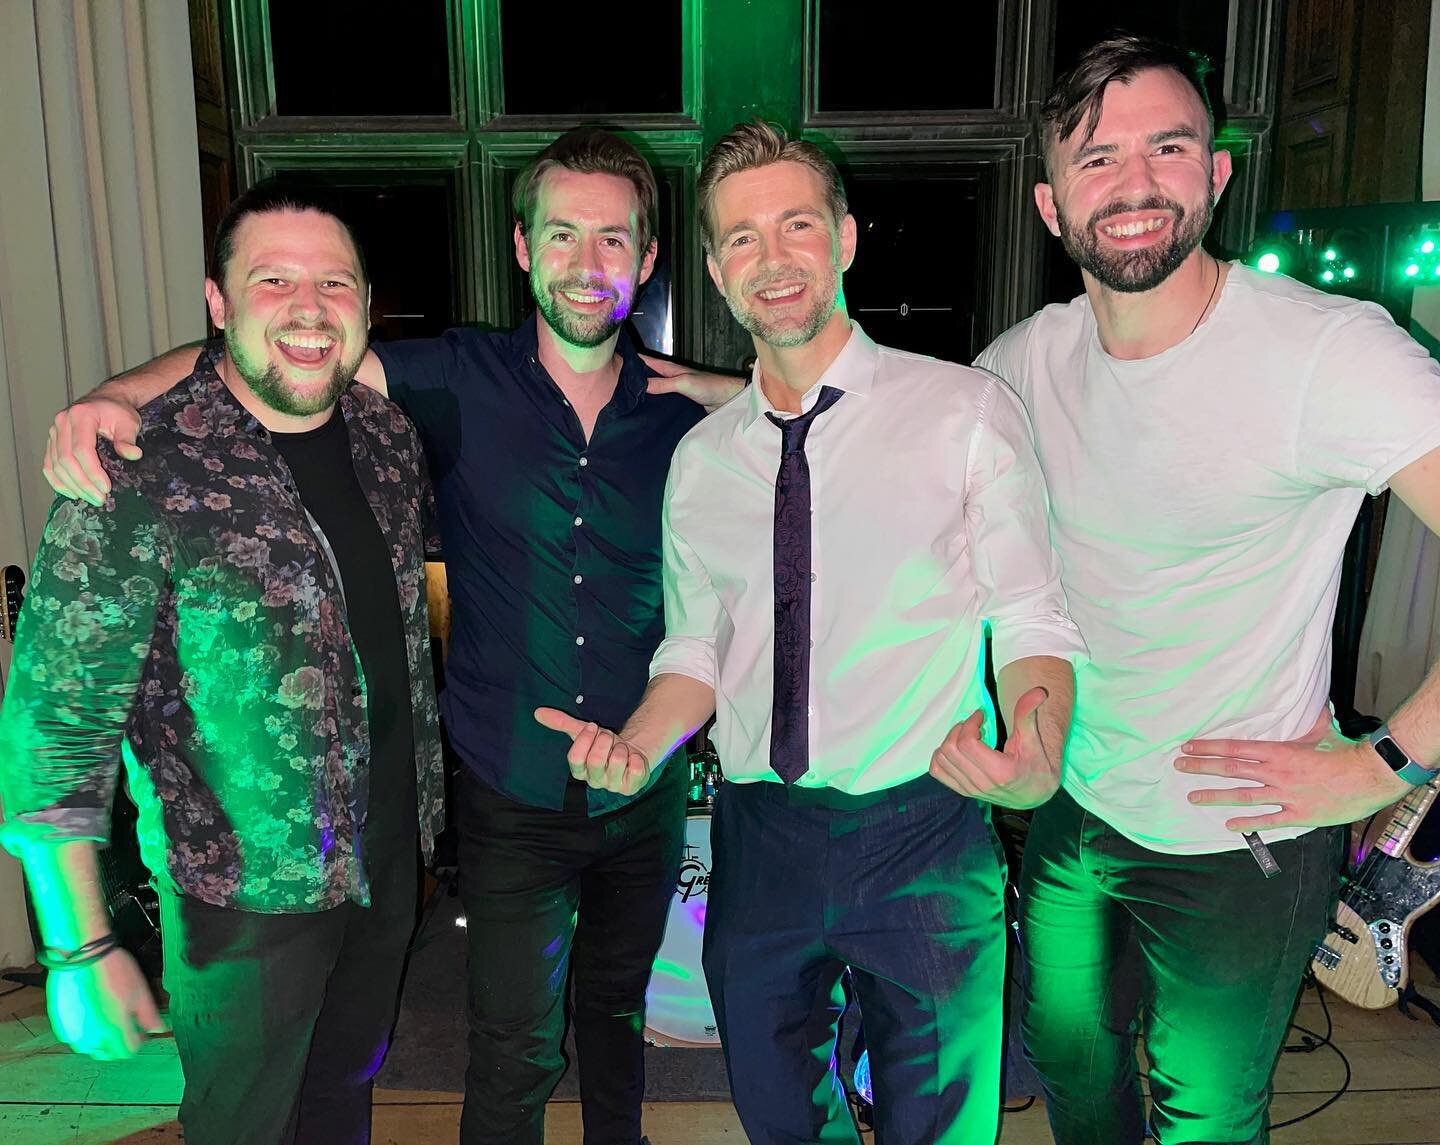 A very special night playing for Lucy and Michael&rsquo;s wedding last night! Thanks so much for having us!

And a big thanks to @markreadofficial from @a1official for joining us on stage. Such a fun night! 

#wedding
#weddingband 
#partyband 
#rocki